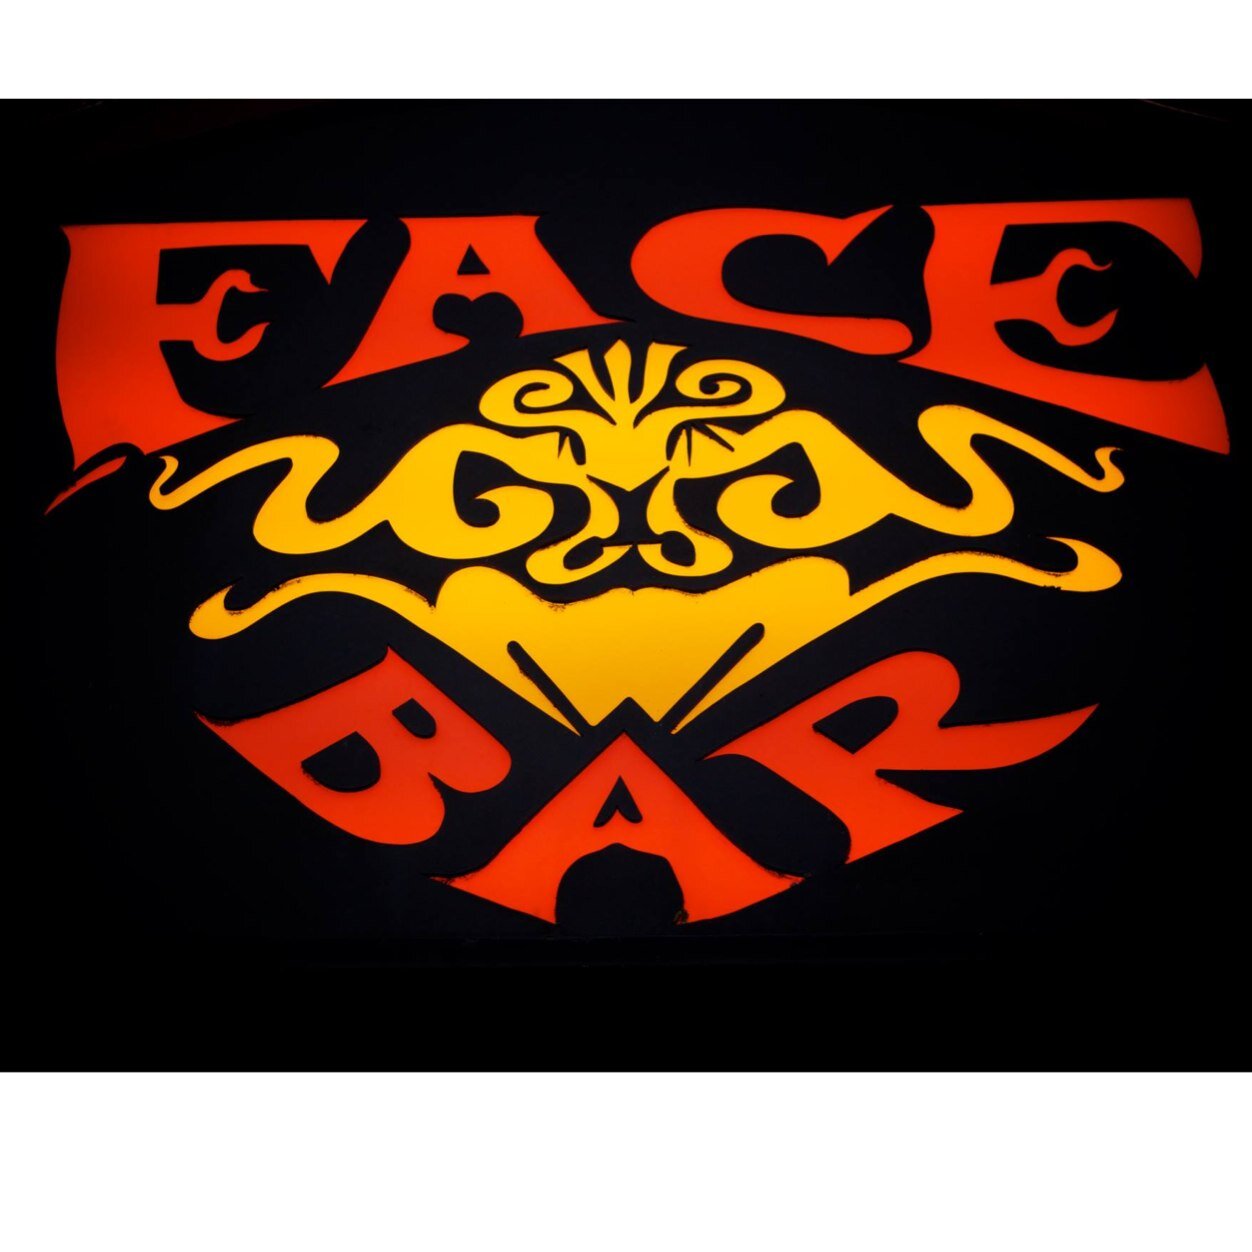 Readings Alternative Venue. Contact us by Phone : 01189568188. Email : info@thefacebar.com or Like us on FaceBook : ReadingFaceBar.